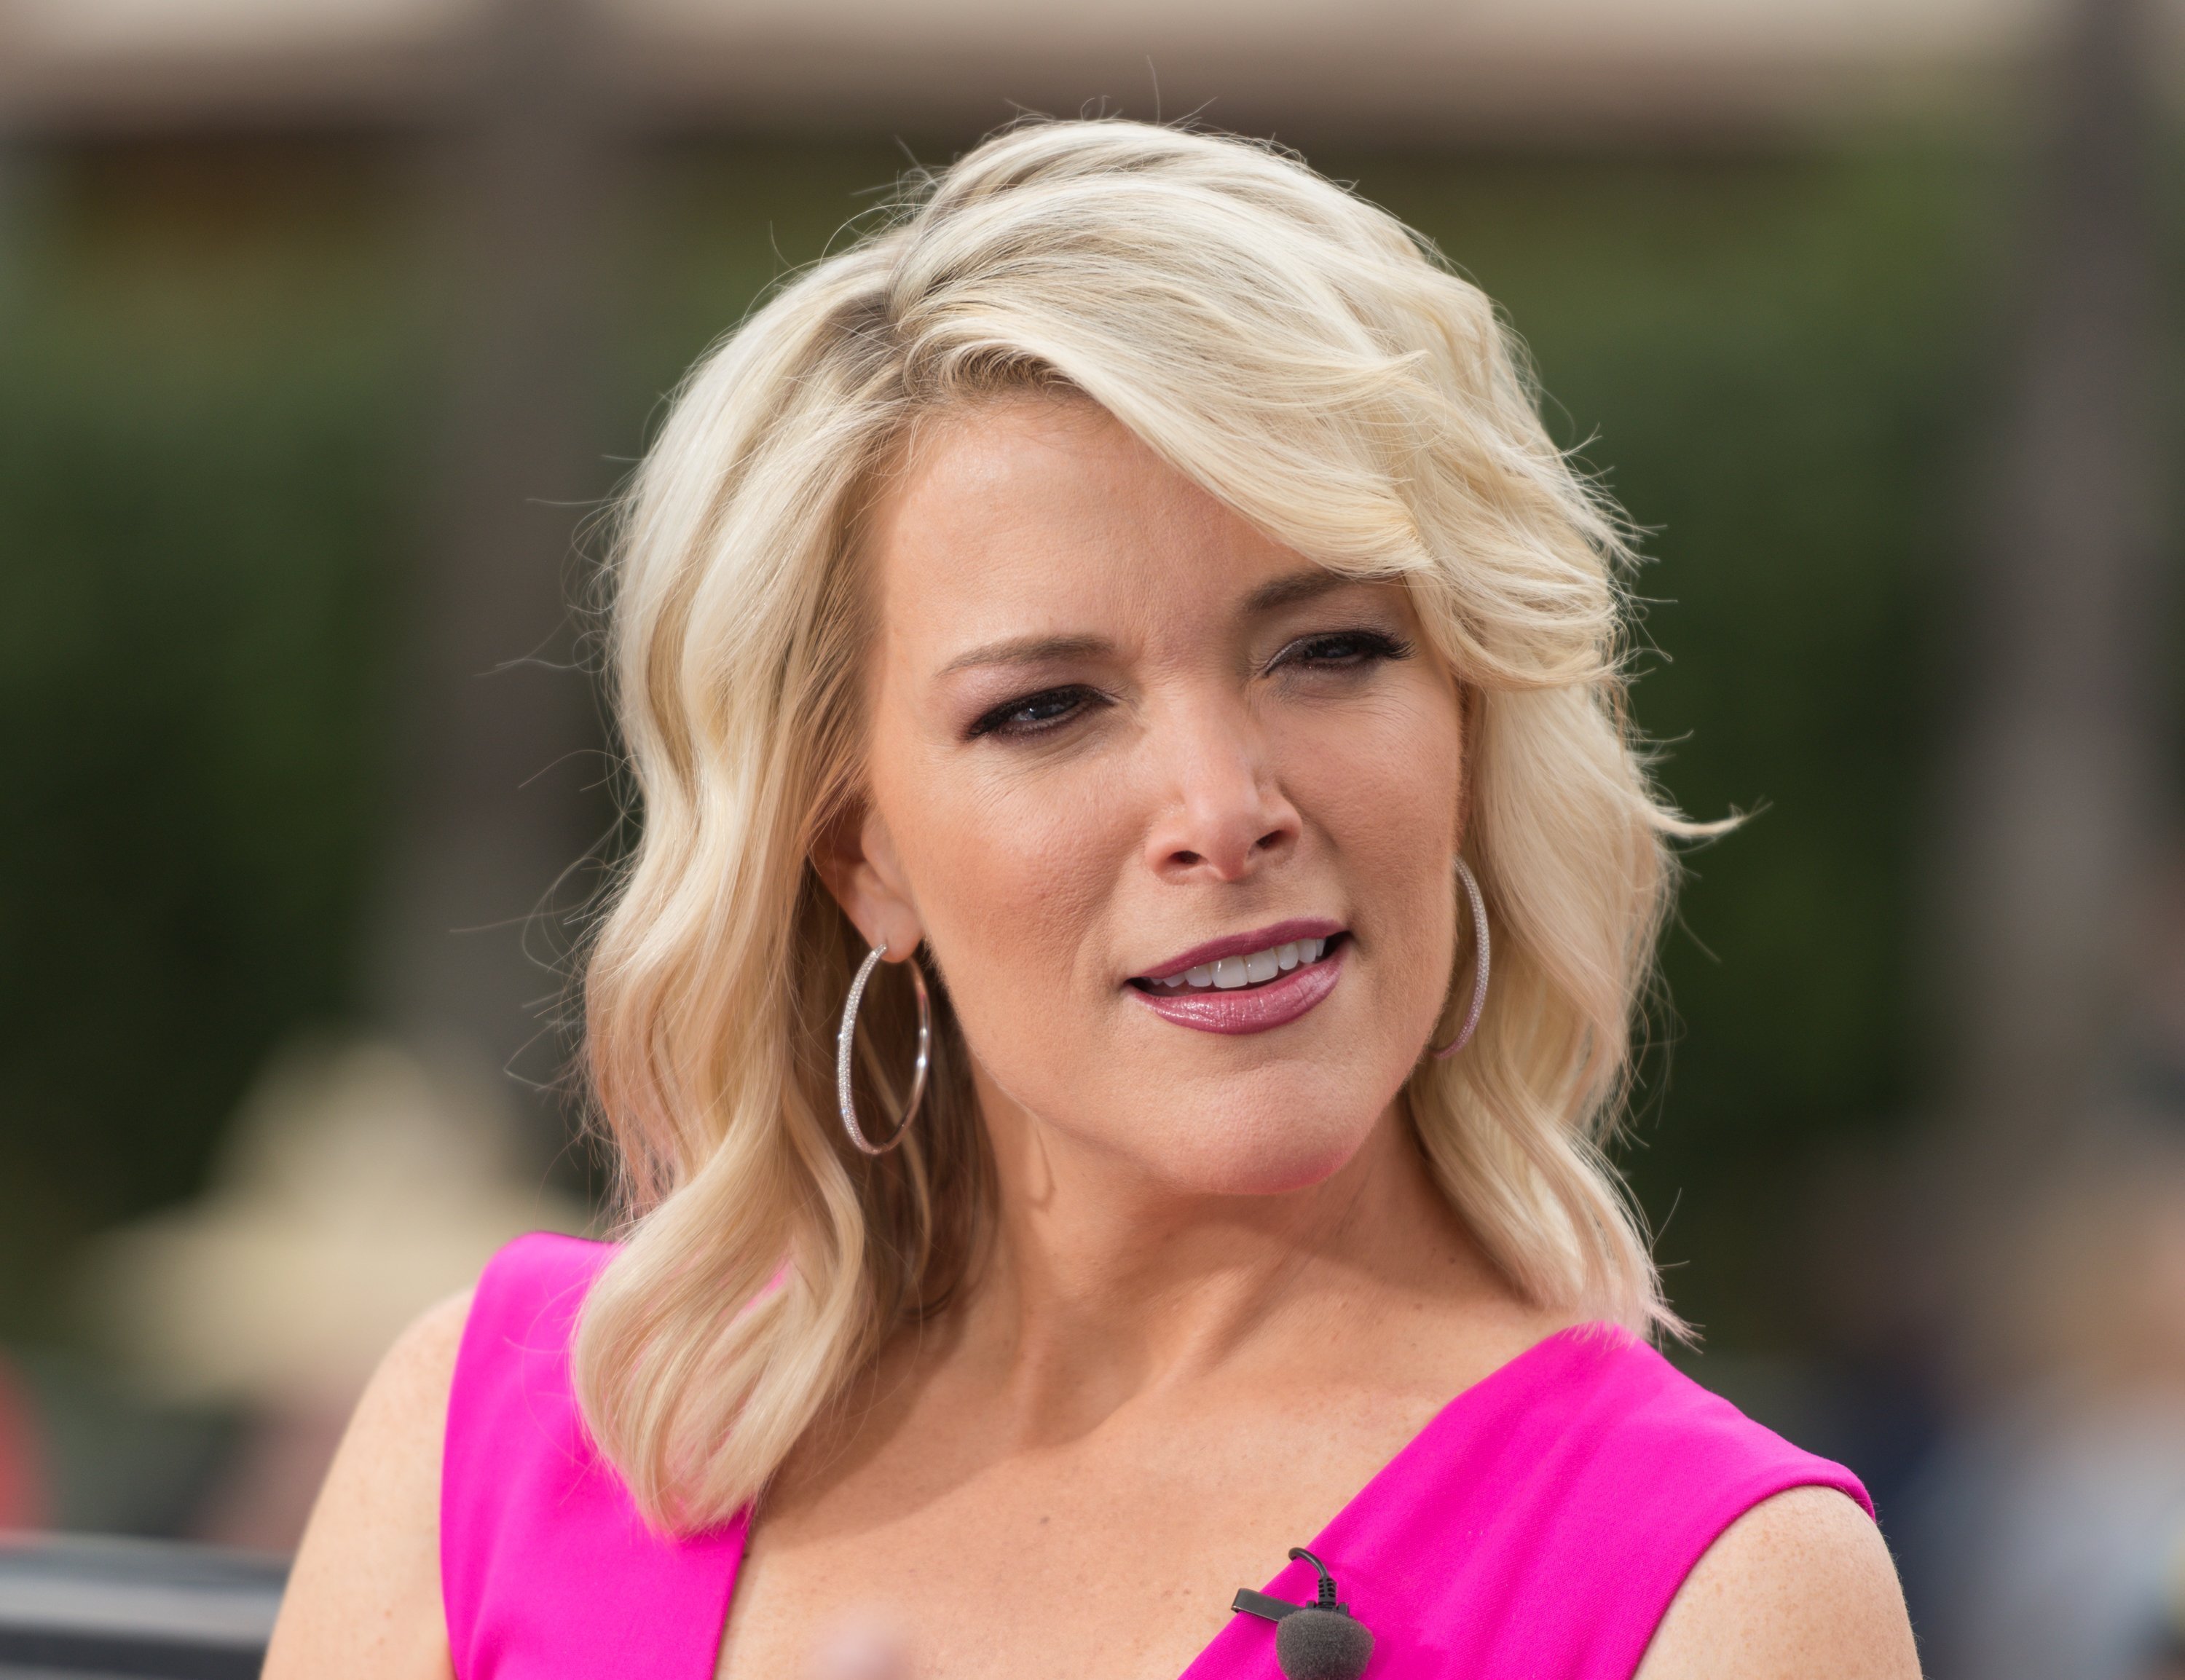 Megyn Kelly visits "Extra" at Universal Studios Hollywood on September 19, 2017, in Universal City, California. | Source: Getty Images.